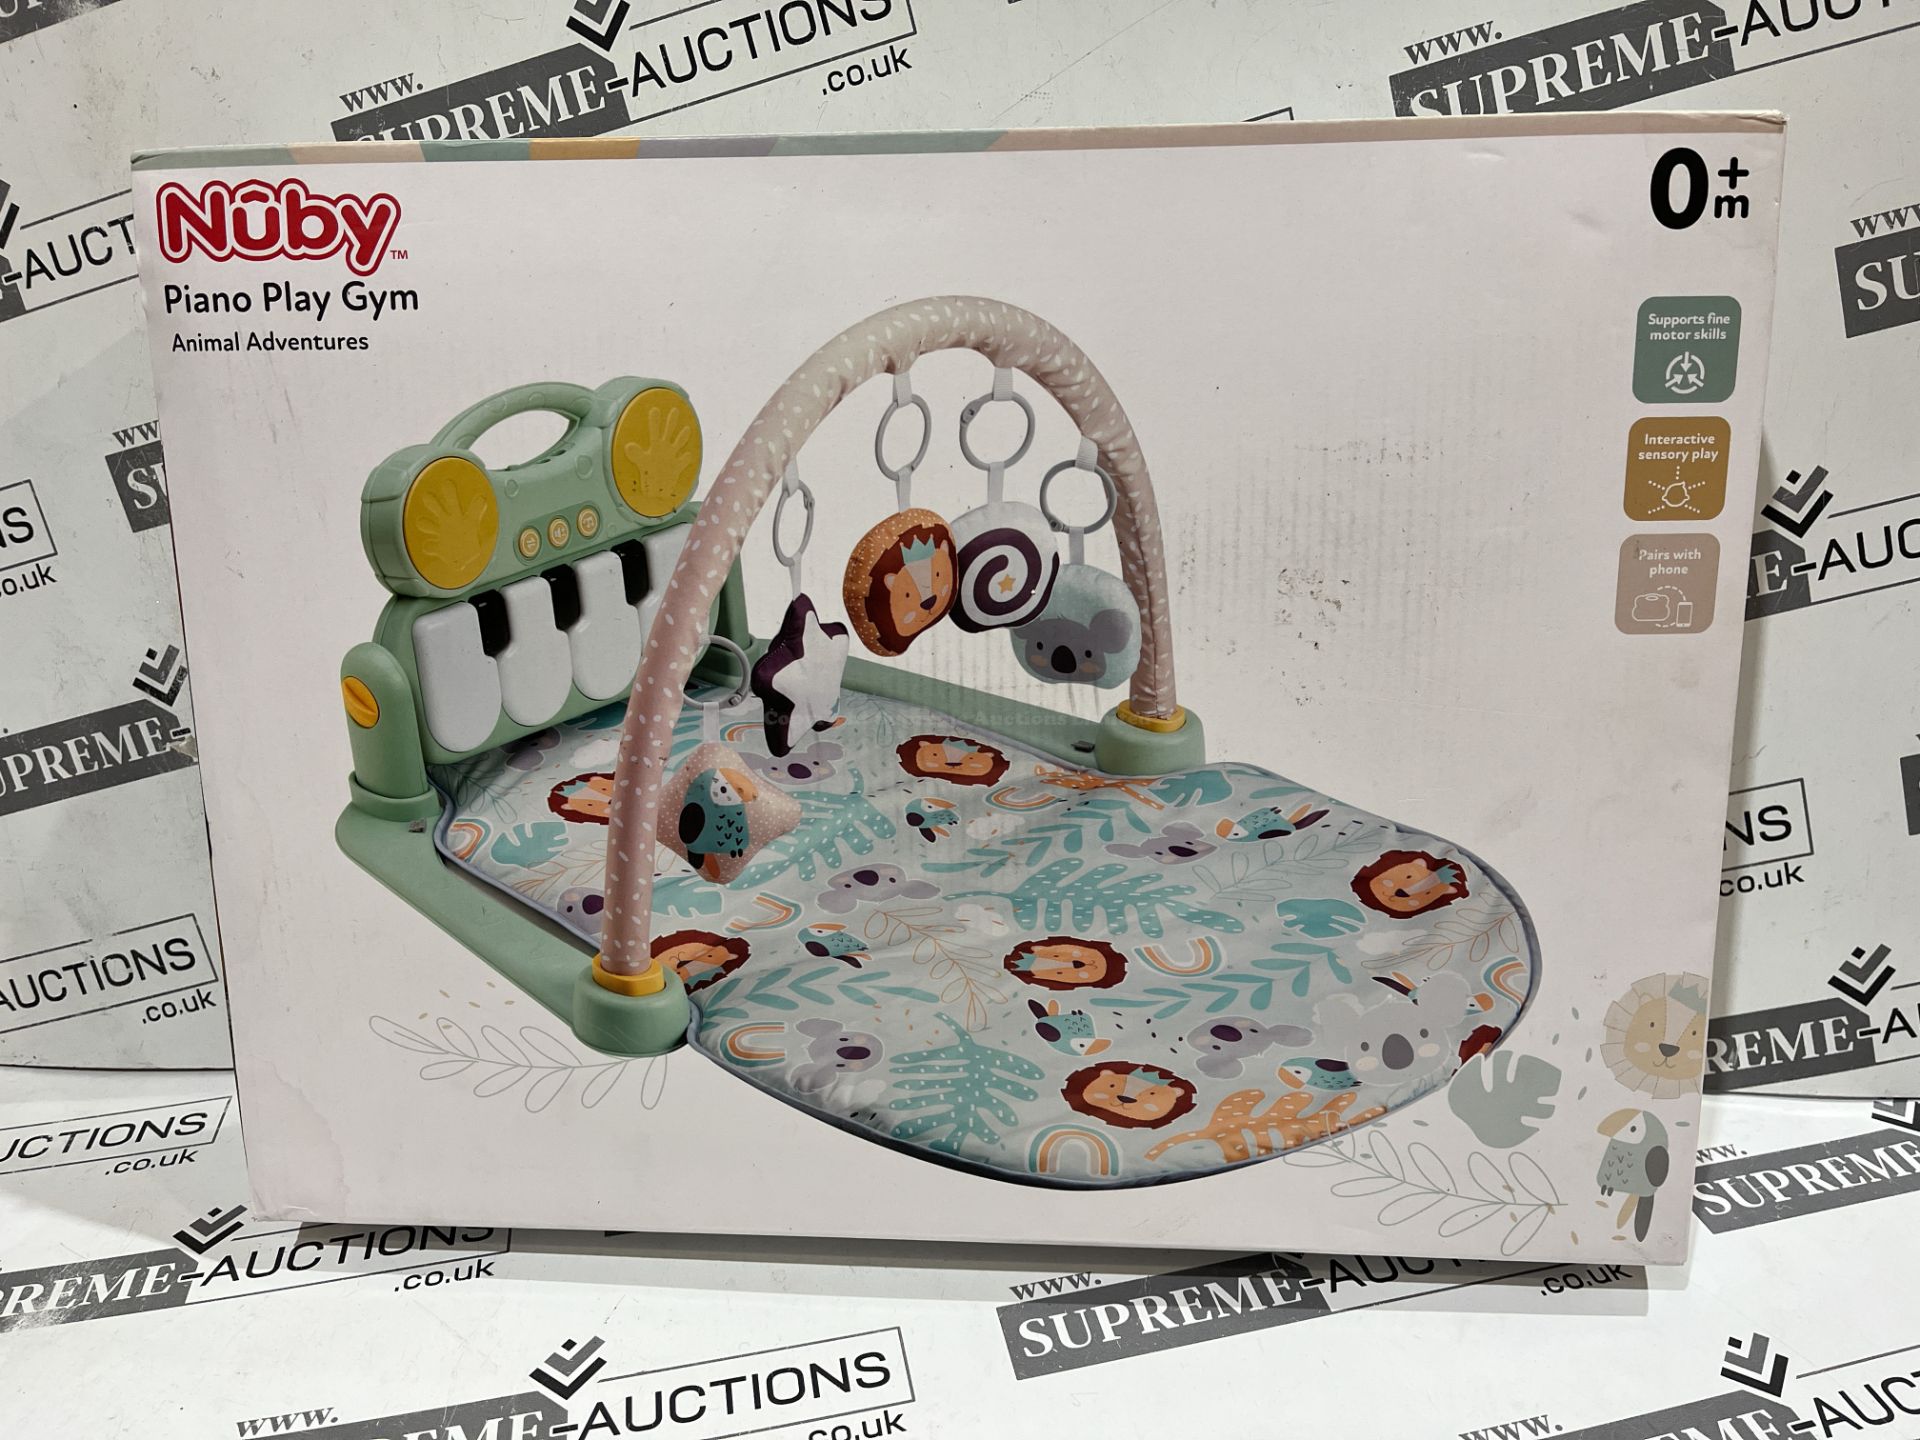 2 X NUBY PIANO PLAY GYMS ANIMAL ADVENTURES R16-11